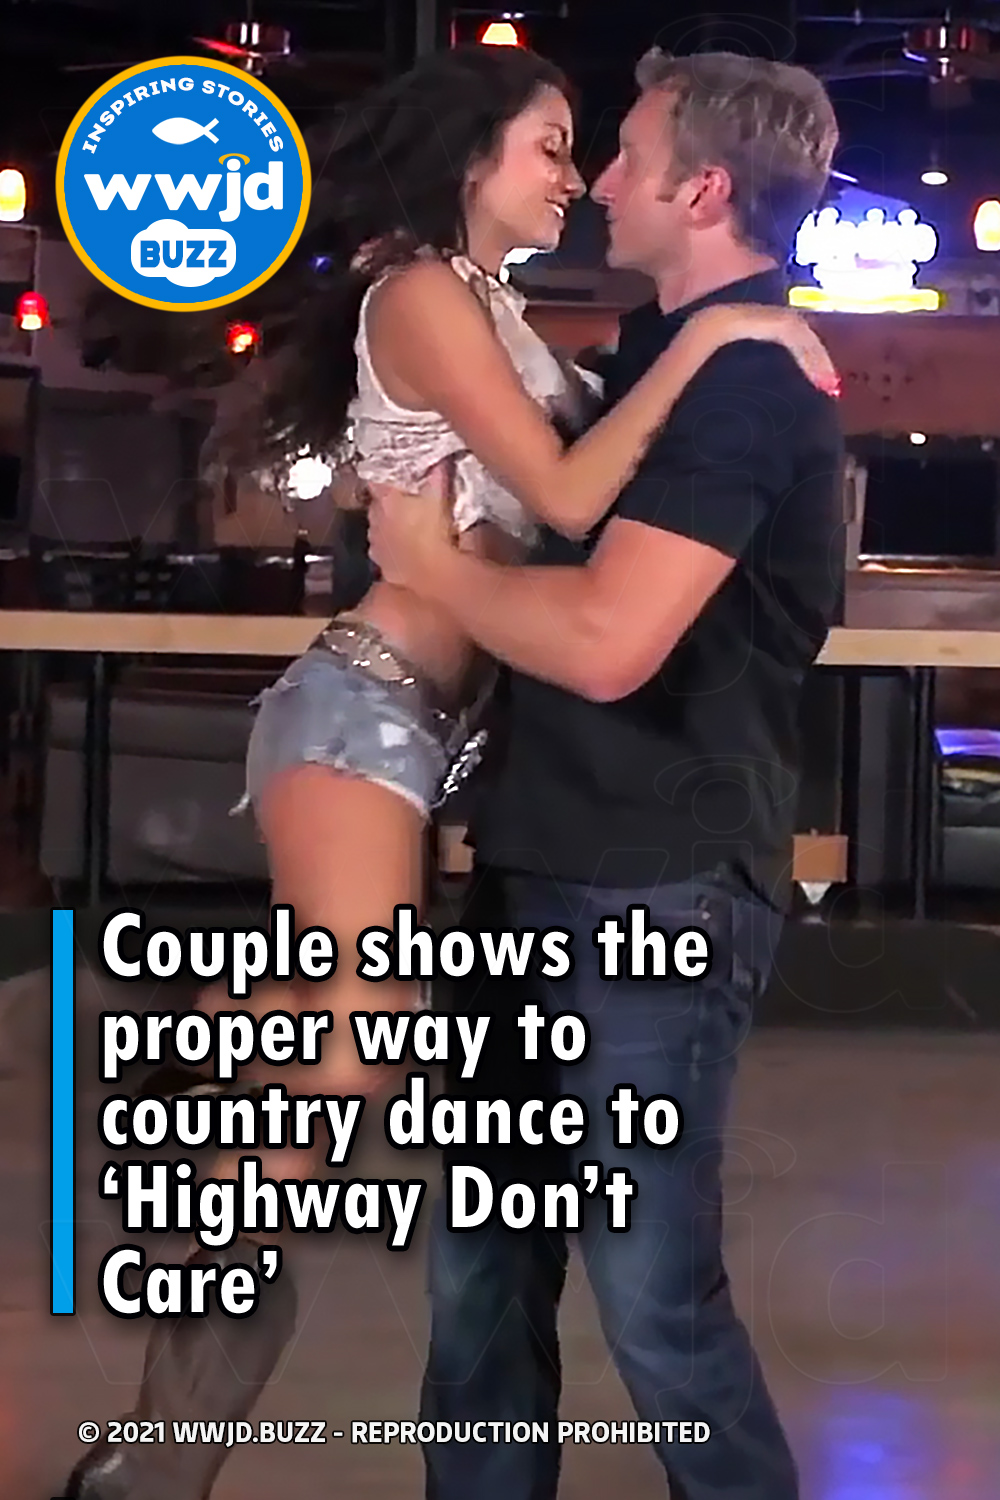 Couple shows the proper way to country dance to ‘Highway Don’t Care’